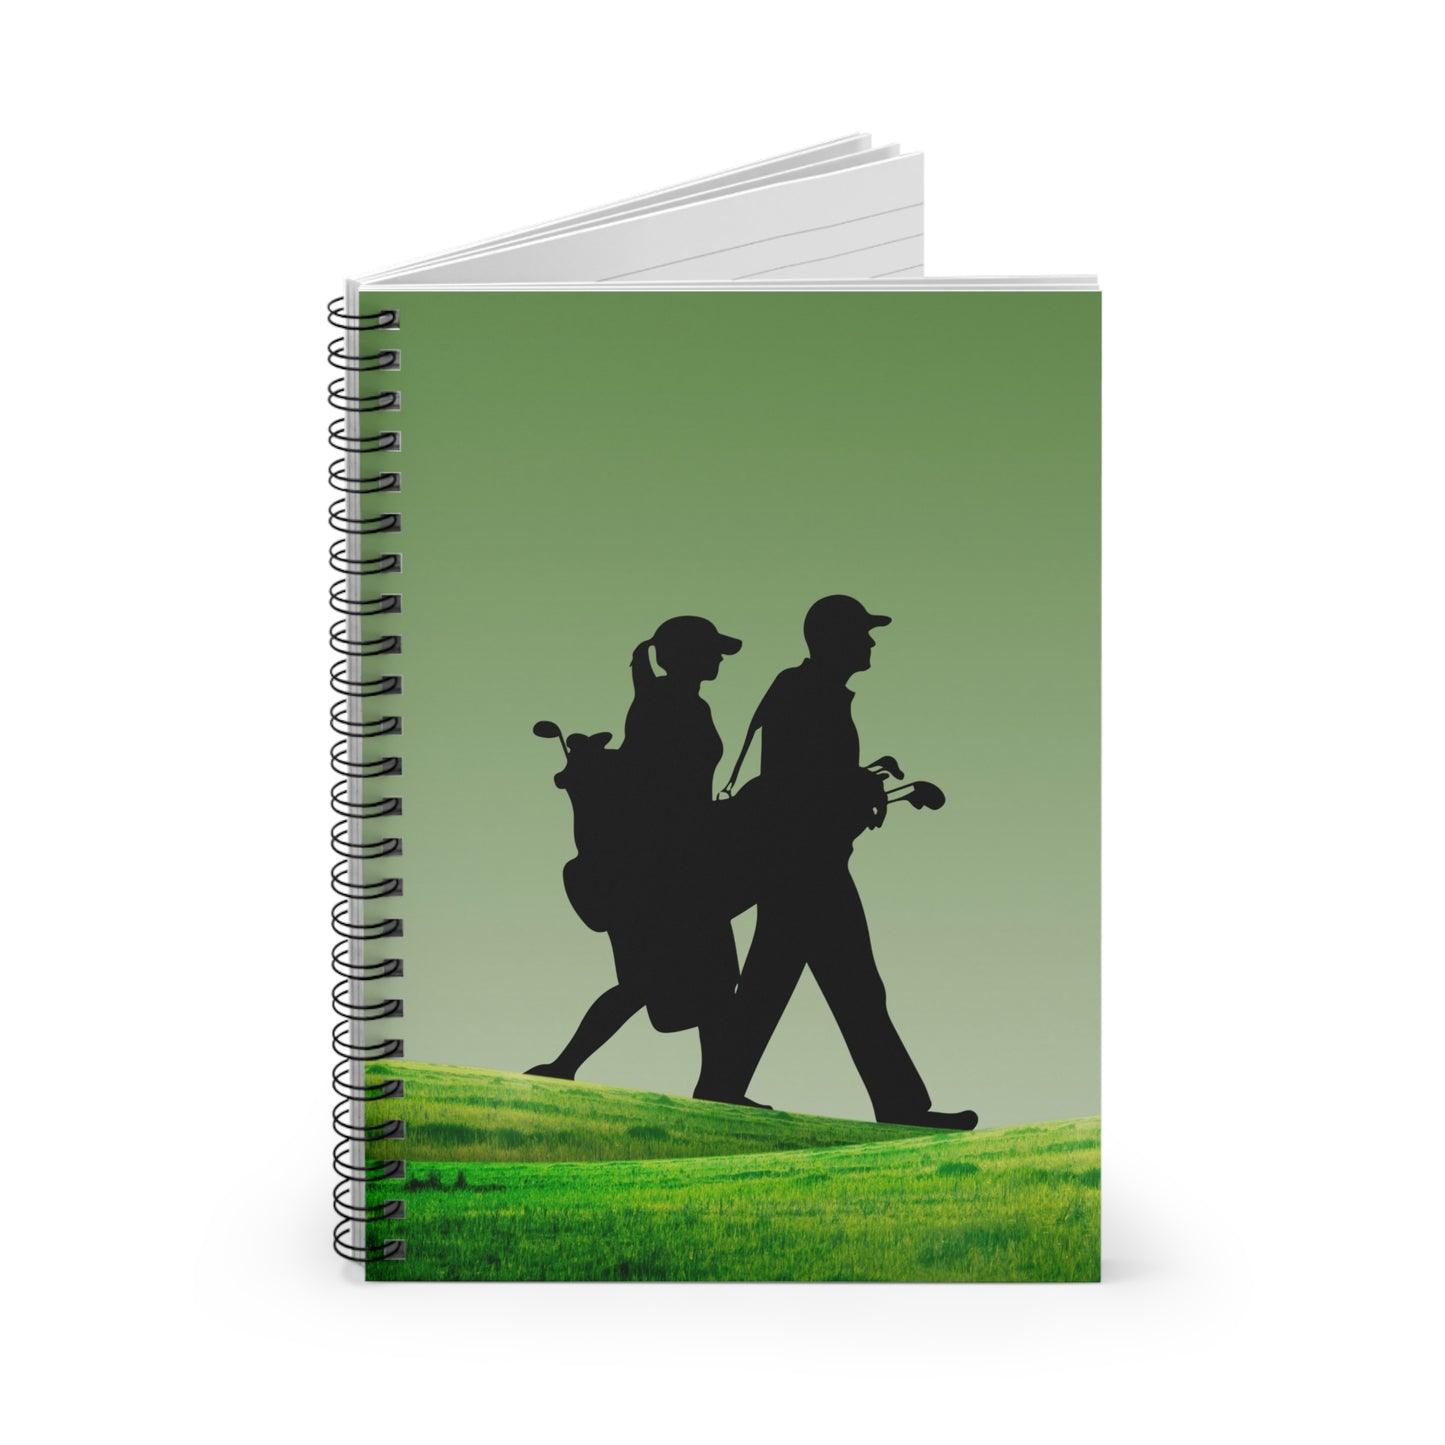 The Long Walk: Spiral Notebook - Log Books - Journals - Diaries - and More Custom Printed by TheGlassyLass